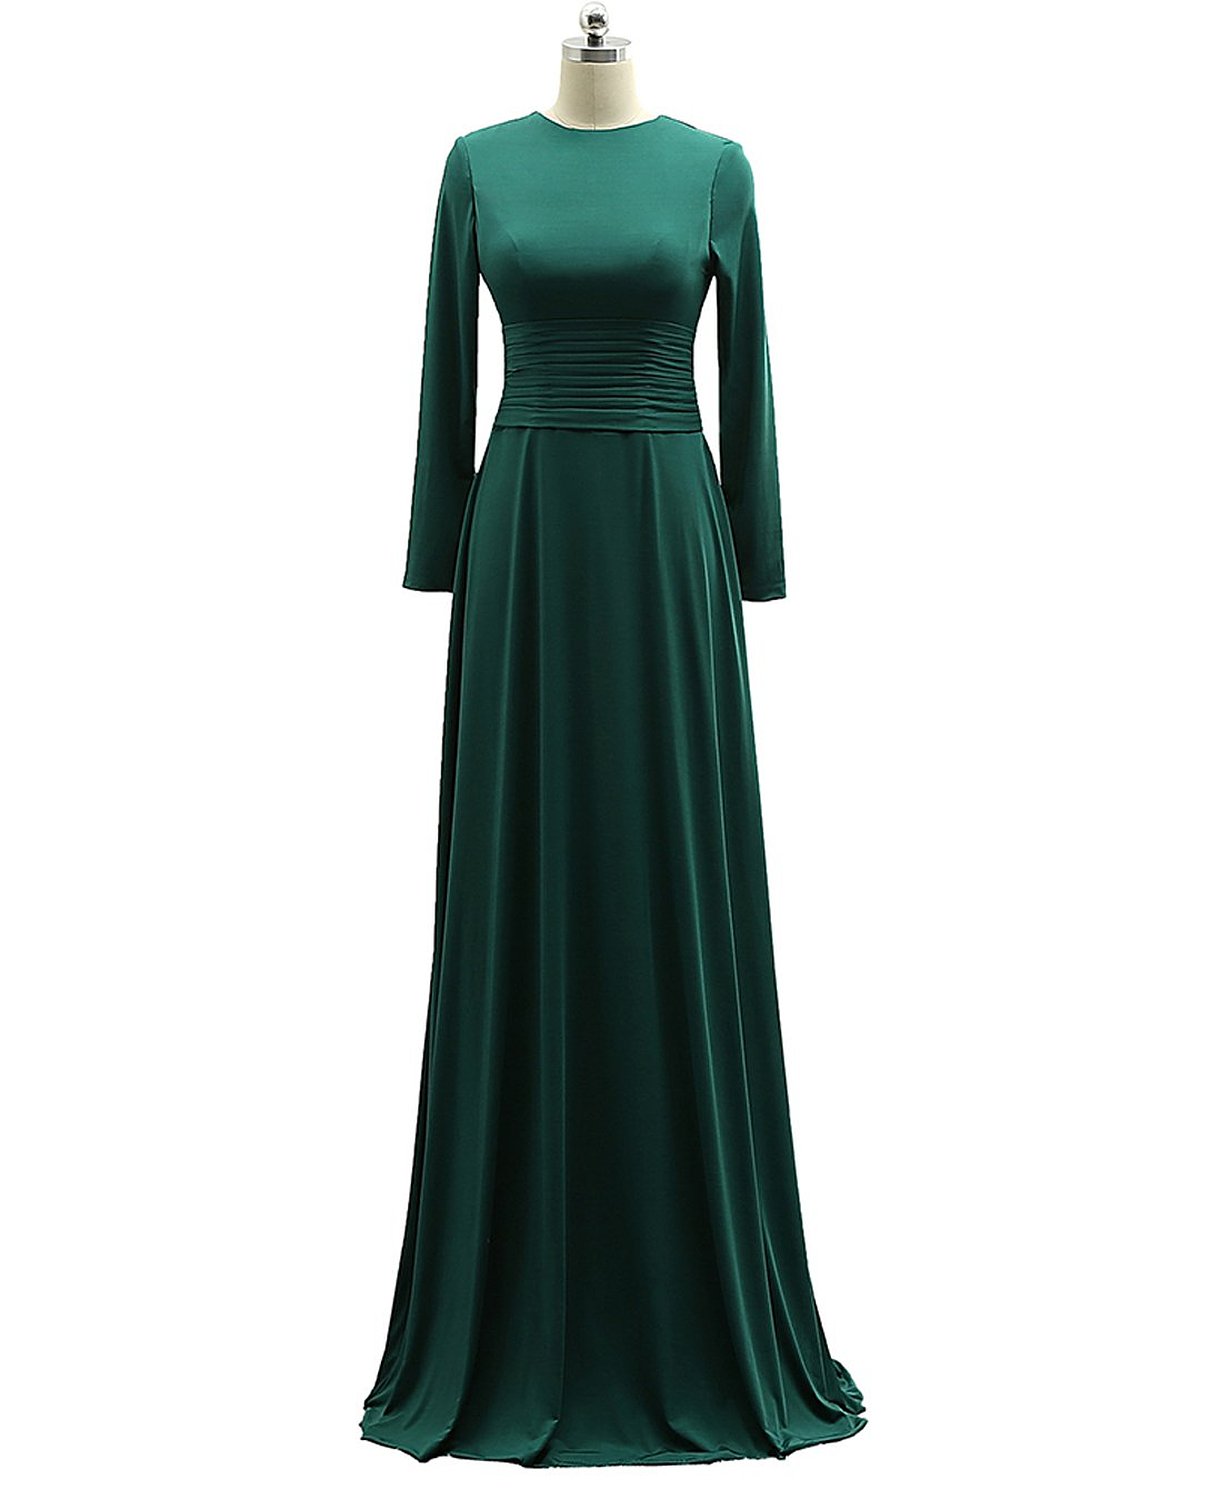 Stylish Long Sleeves Dark Green A-line Formal Dresses, Prom Gowns 2018, Evening Dresses 2018